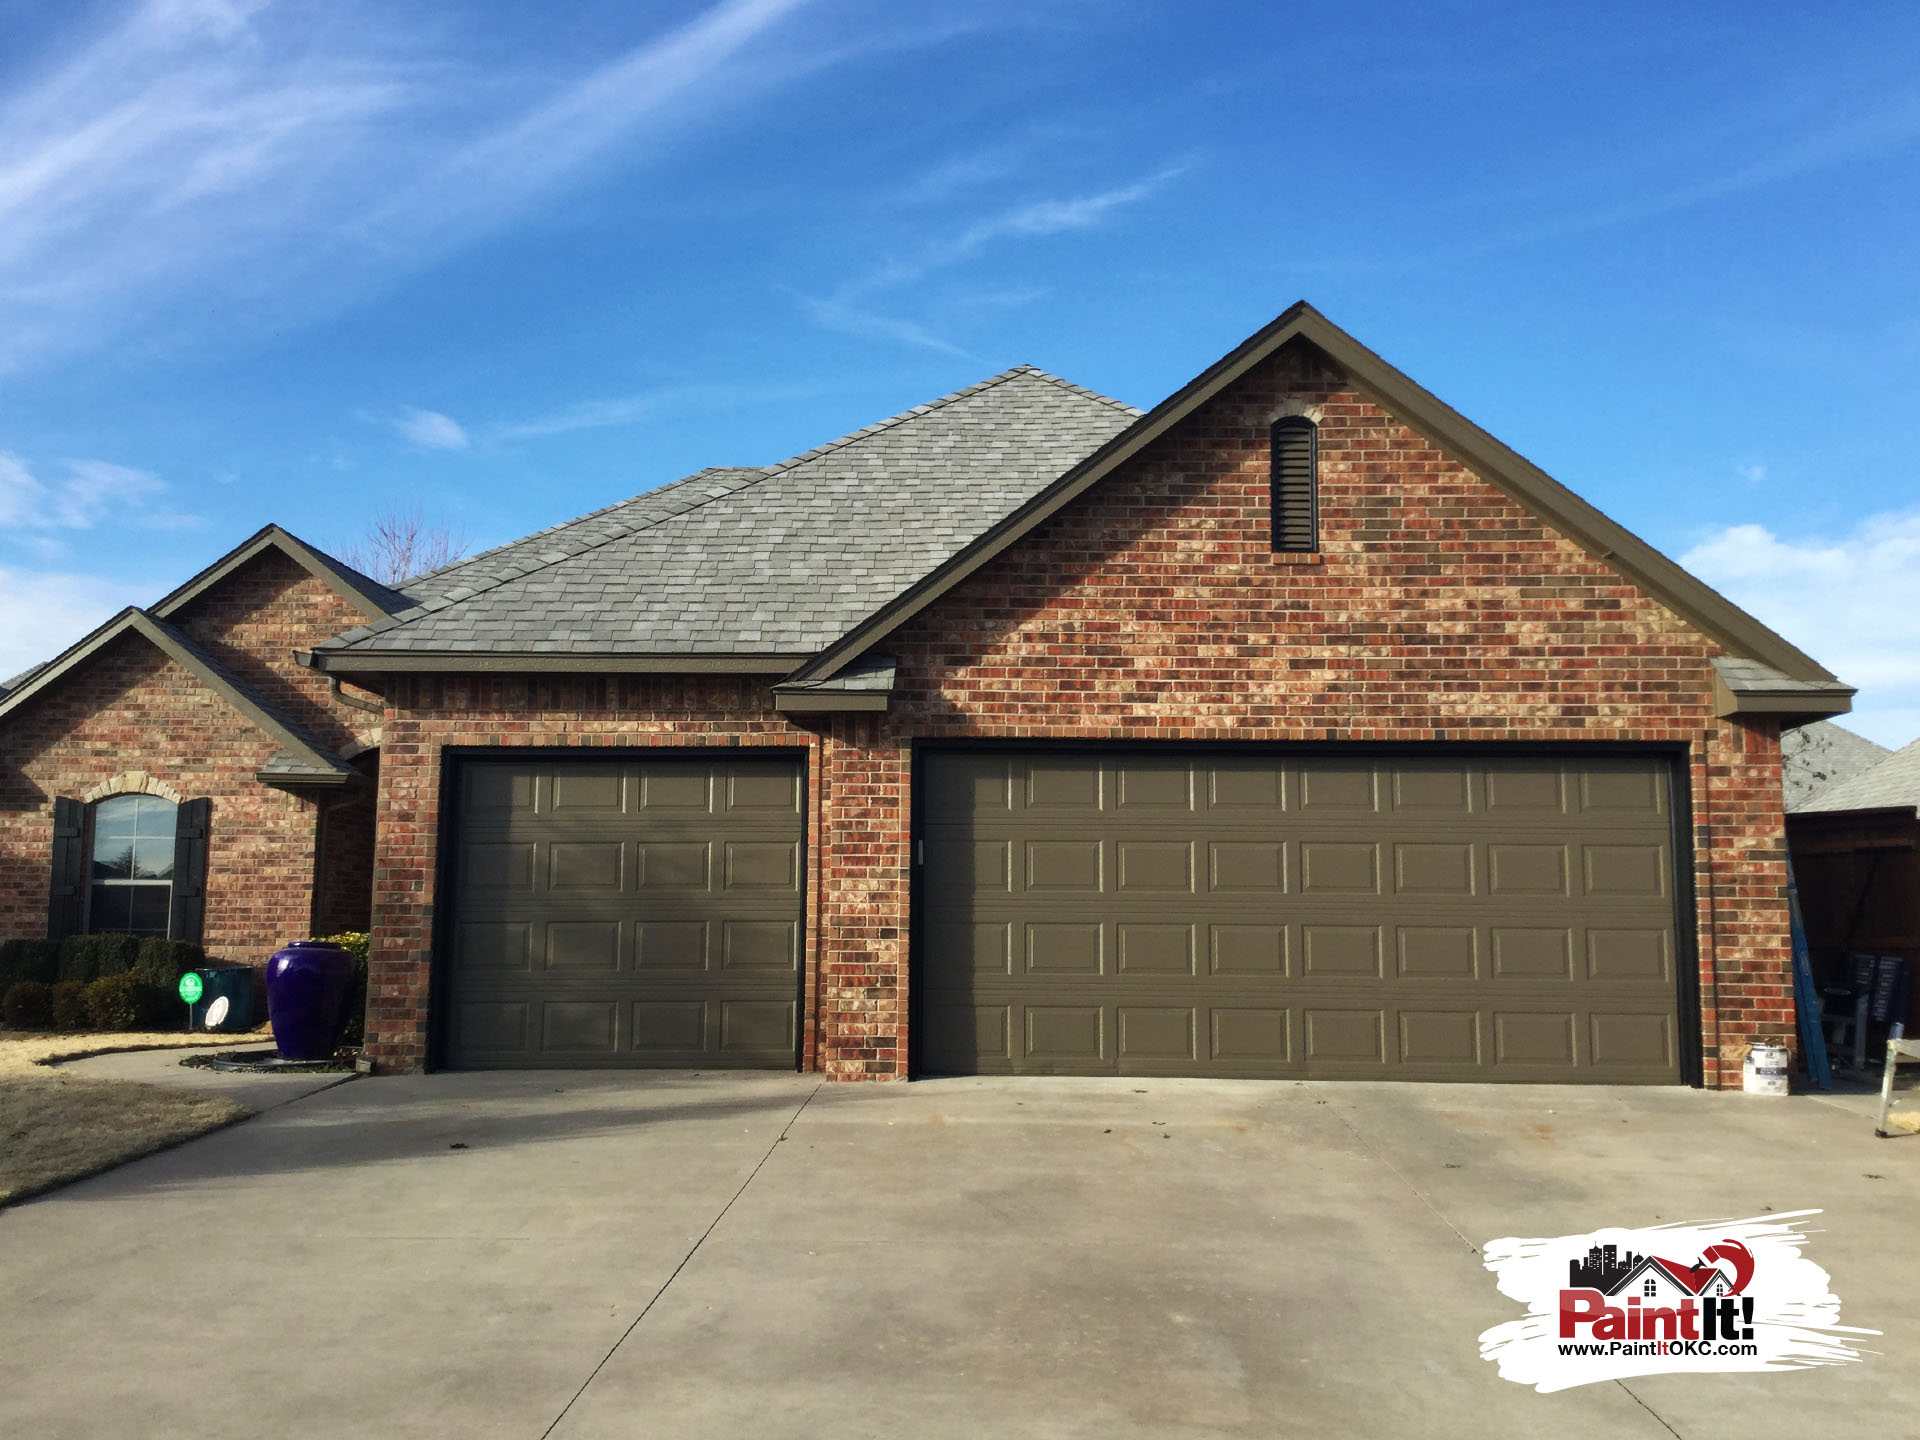 a newly painted brown garage attached to a brick house in oklahoma